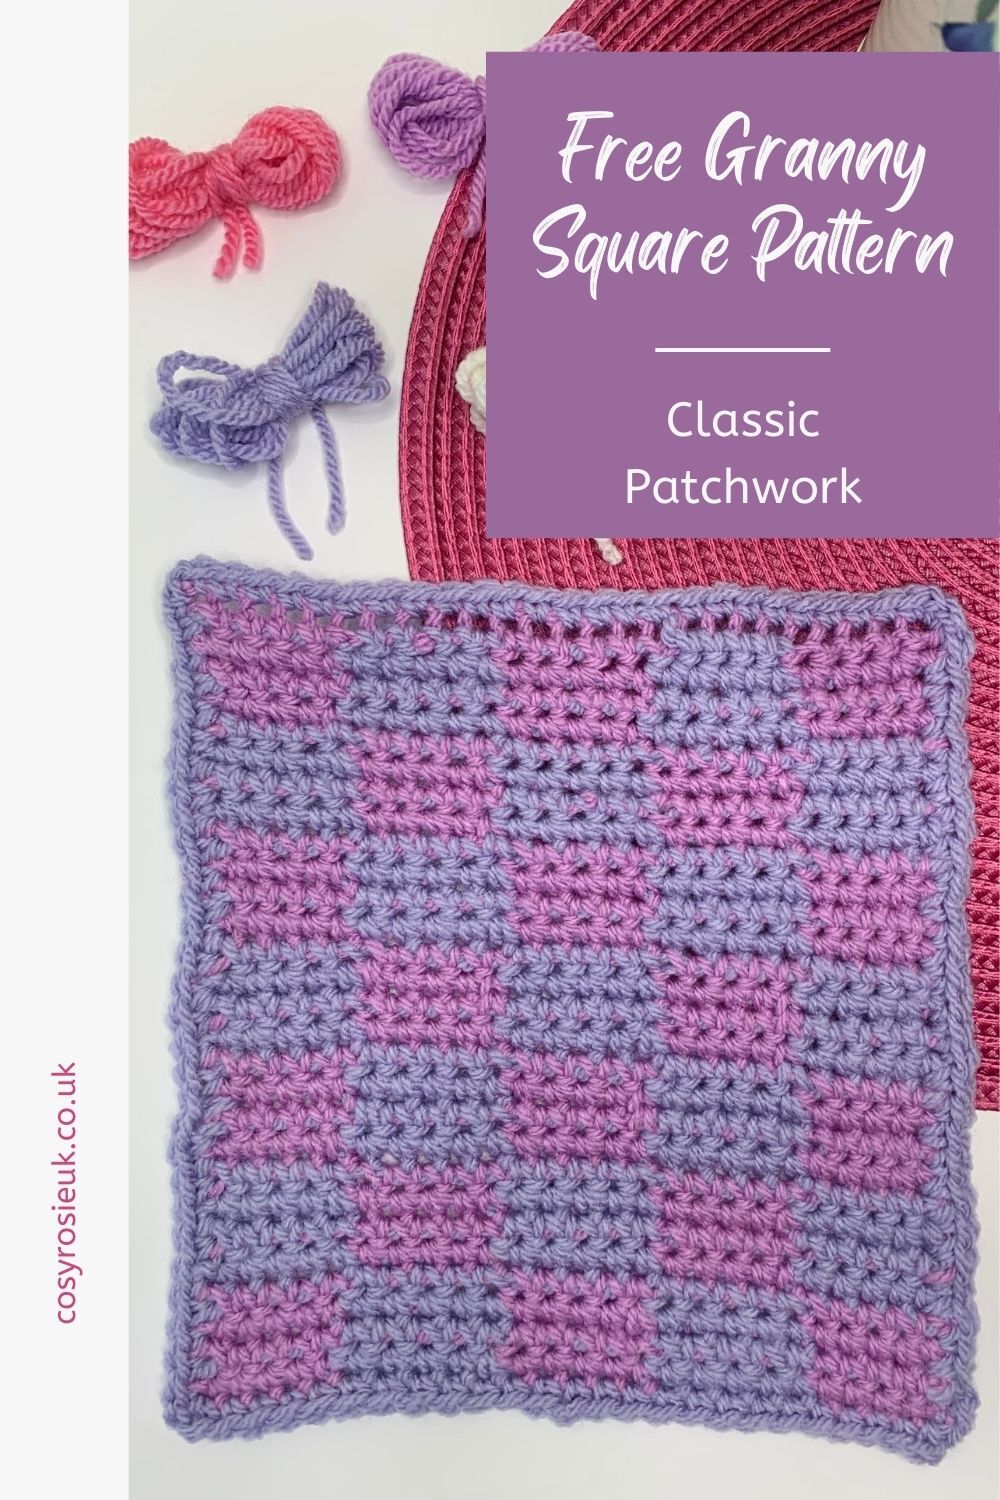 Unique way to join granny squares